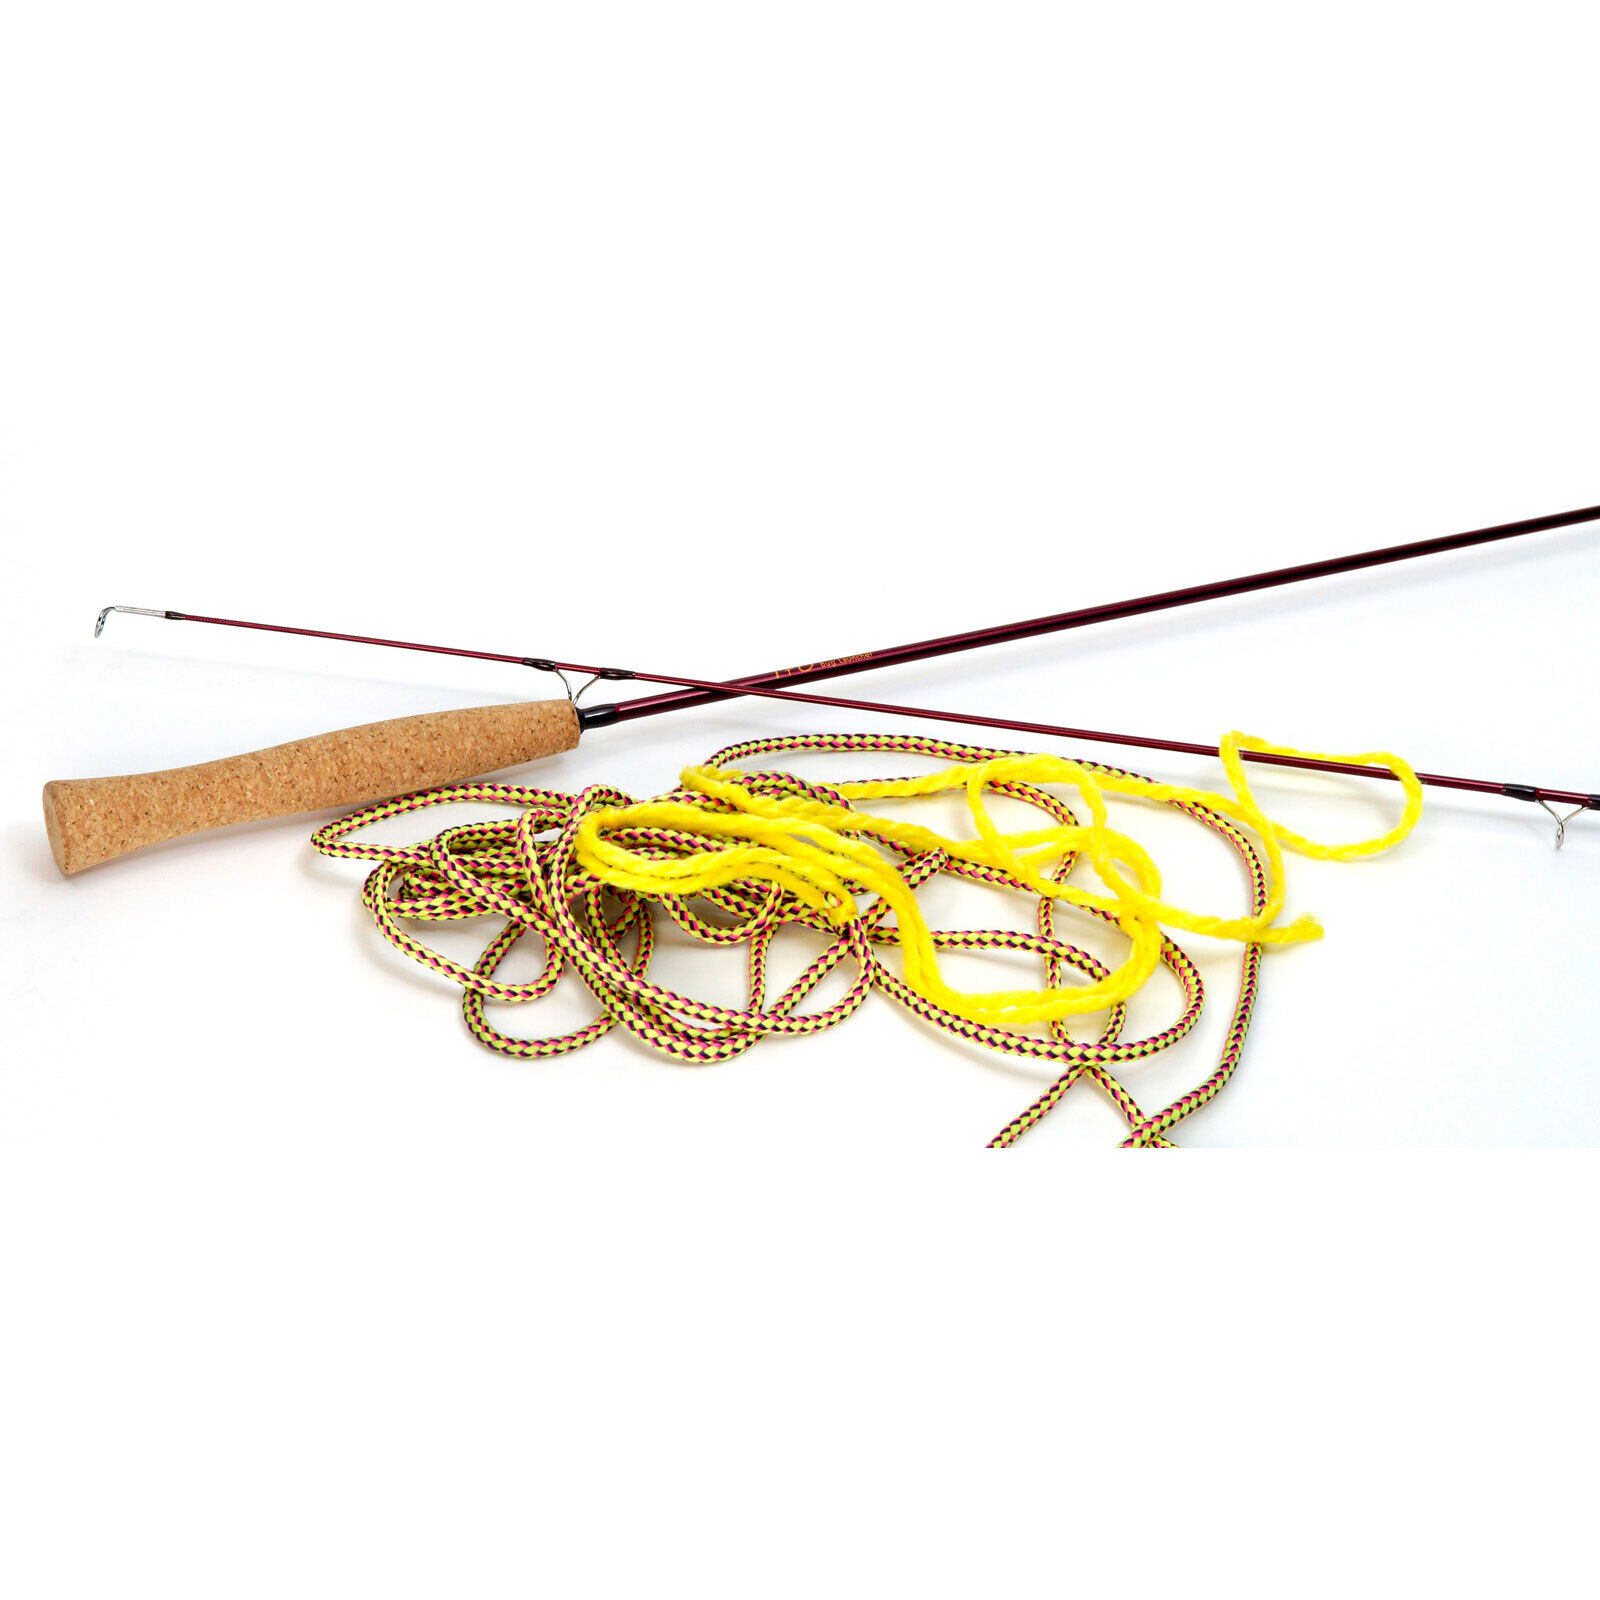 TFO Office/Casting Practice Fly Rod - 4\'10\